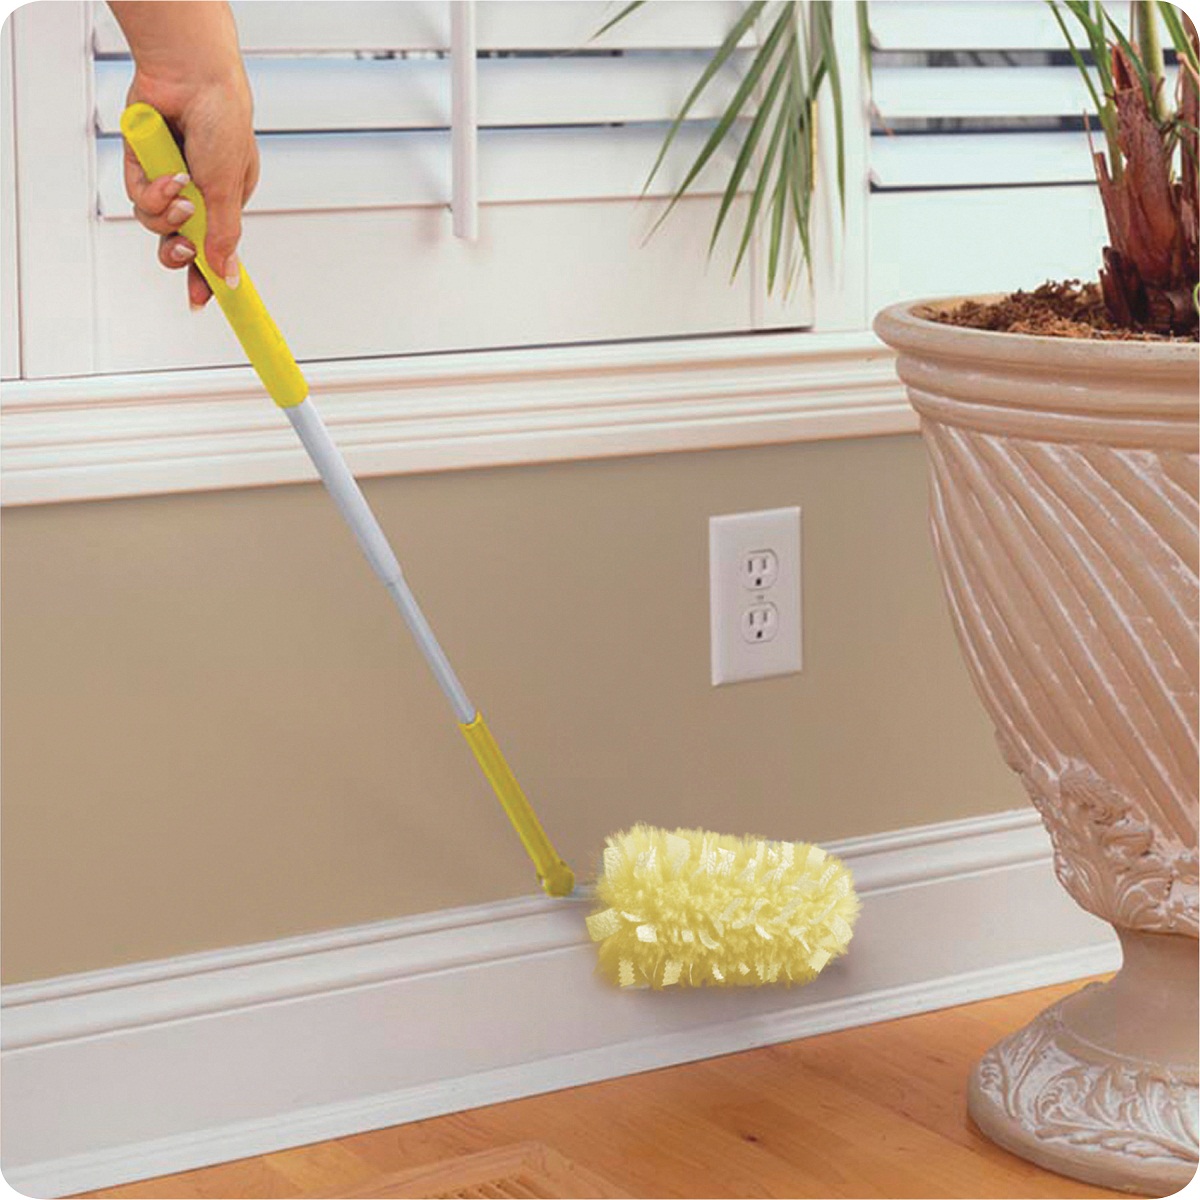 How To Attach Swiffer 360 Duster